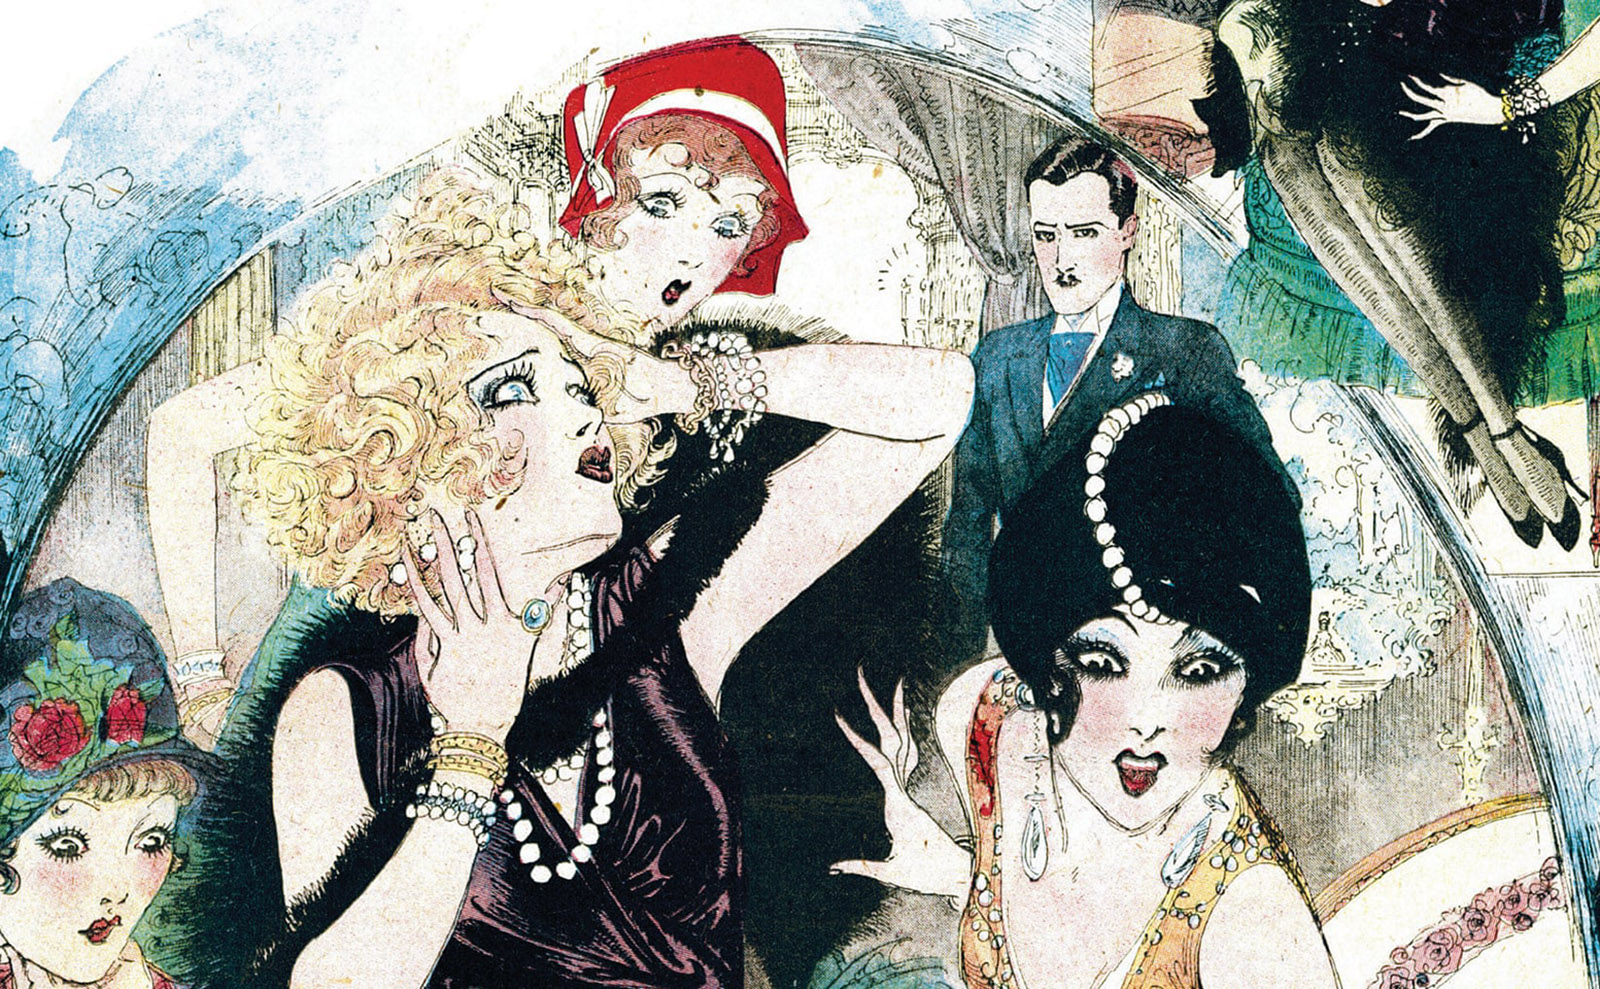 Trip the Light Fantastic in the Snazzy Jazz Age with the Comics in 'Flapper Queens'